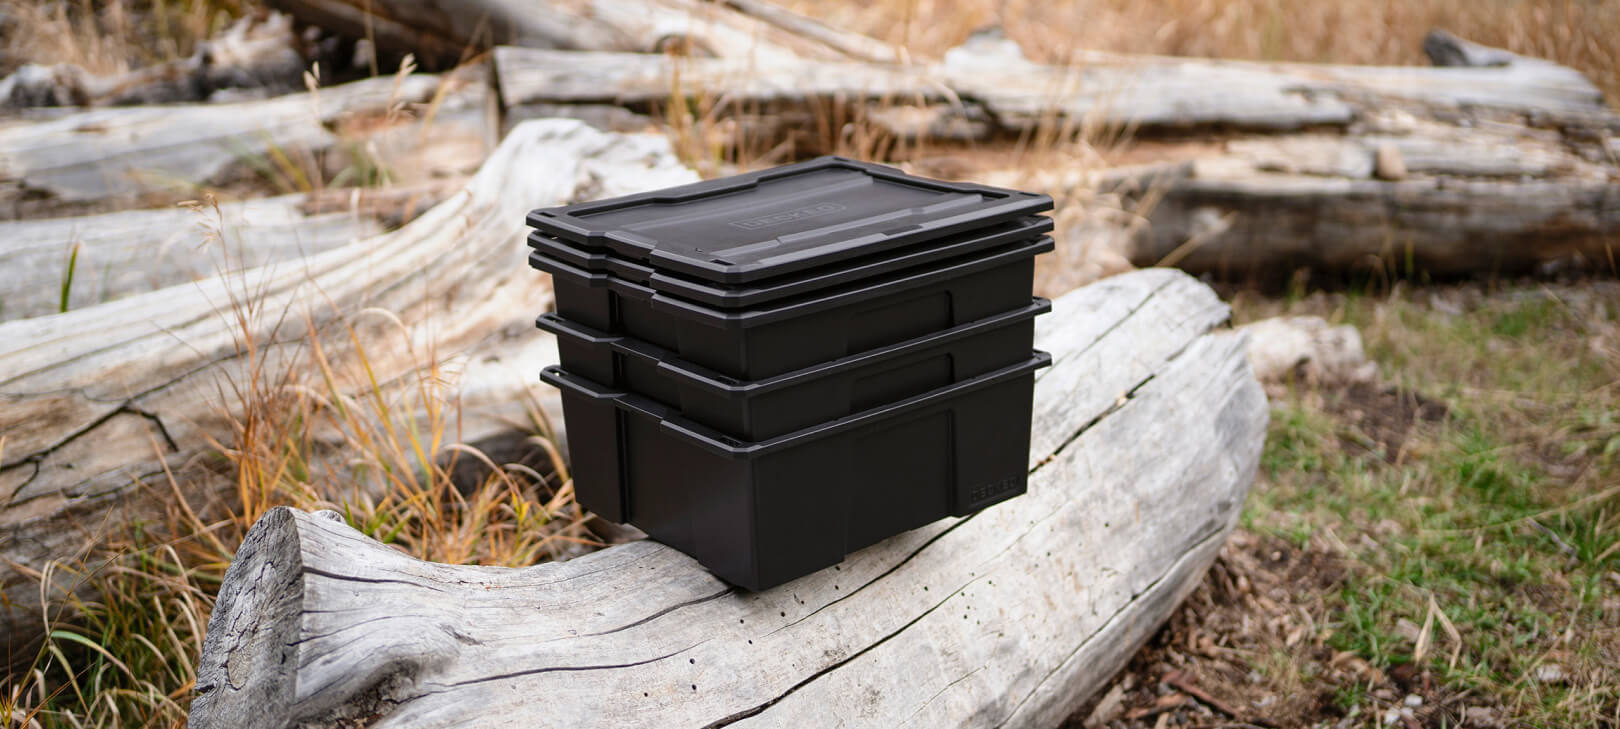 Black D-co bin sitting on a log in the backcountry